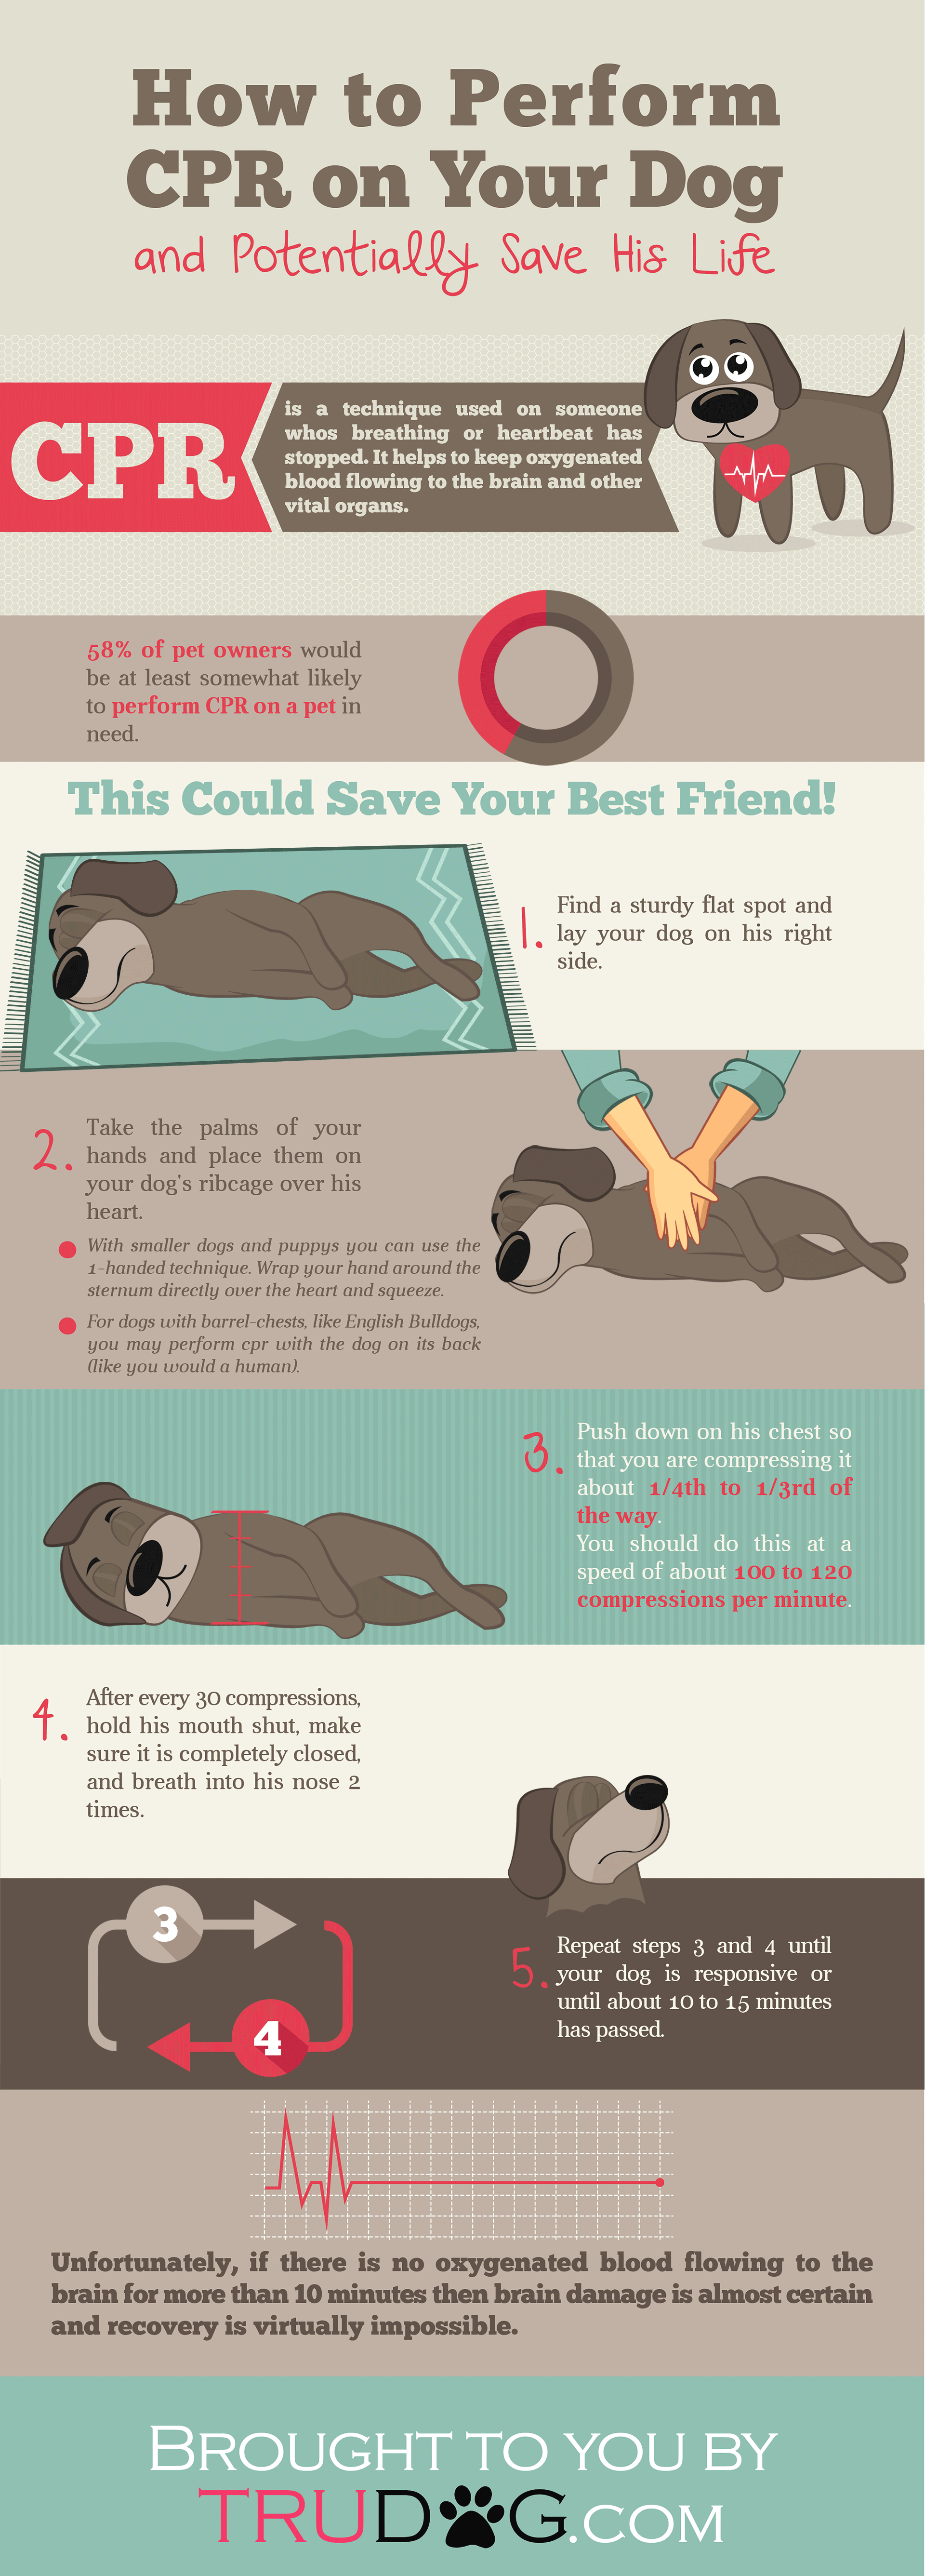 how to perform cpr on dog